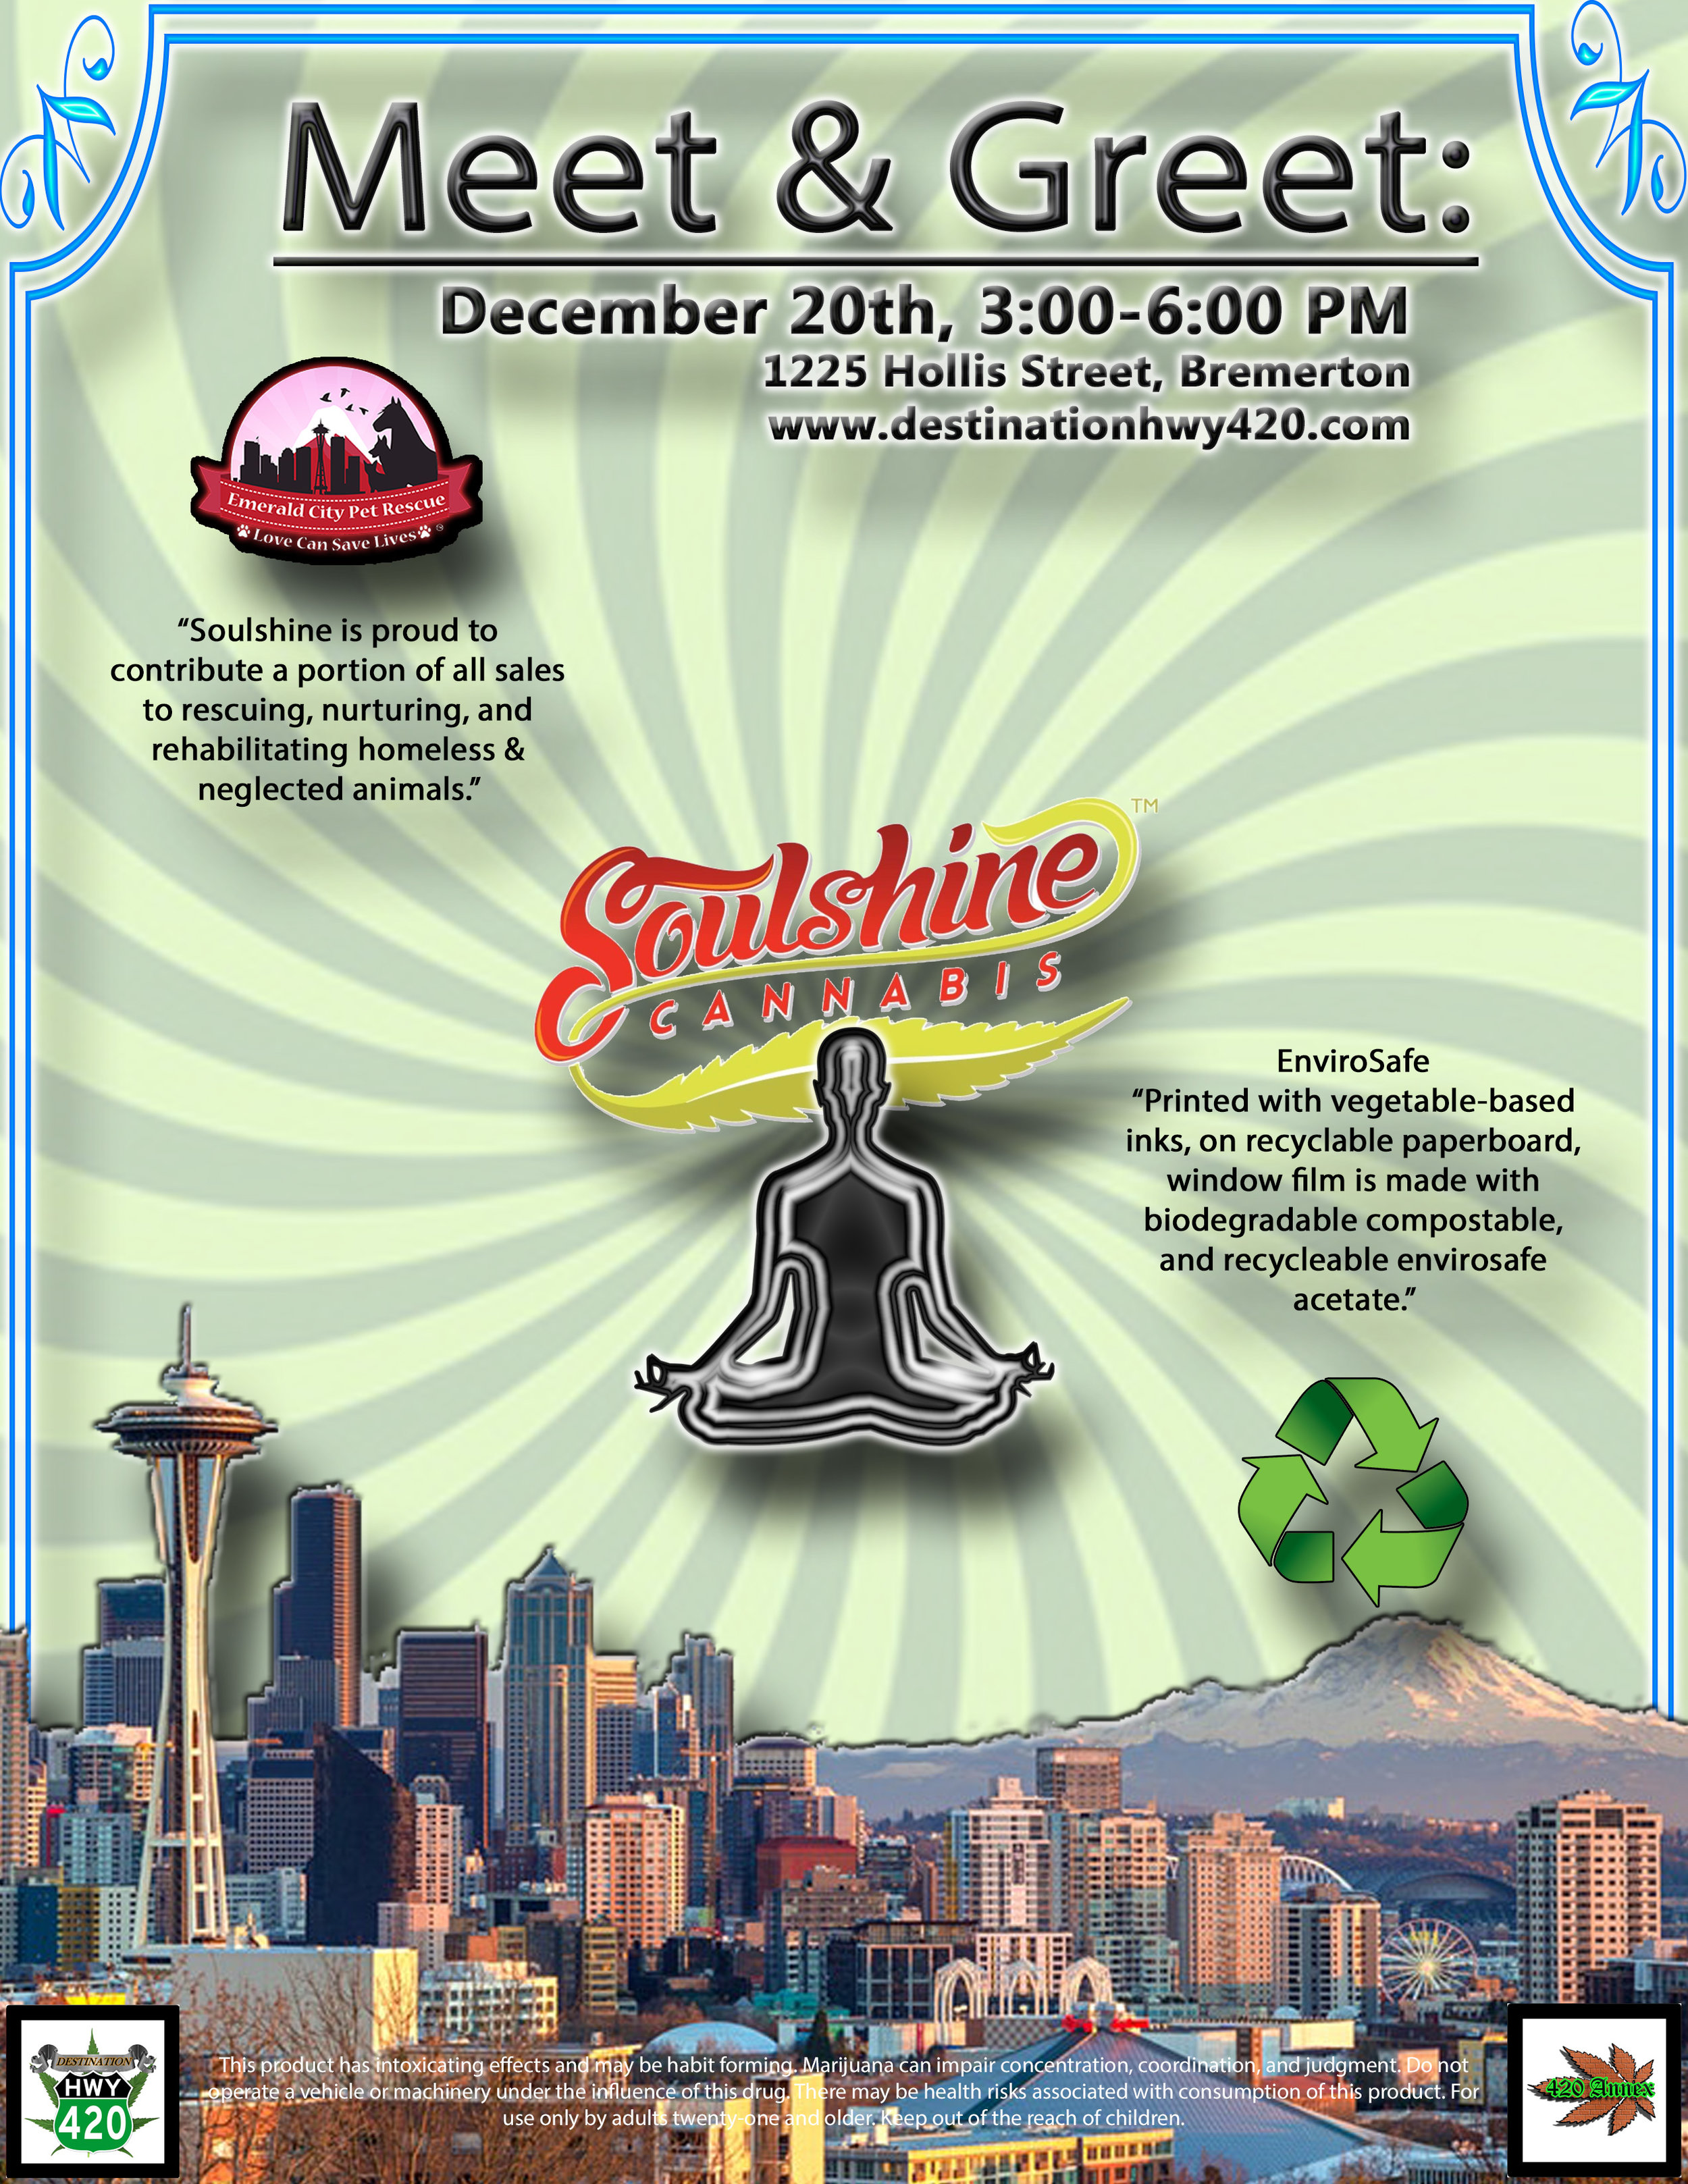 Soulshine Cannabis is an environmentally conscious top shelf marijuana producer/processor located in Renton, WA. Soulshine will be at Destination HWY 420 this Thursday for a Meet &amp; Greet. Come on down and meet the Soulshine team and pick up some of their products for super low prices.